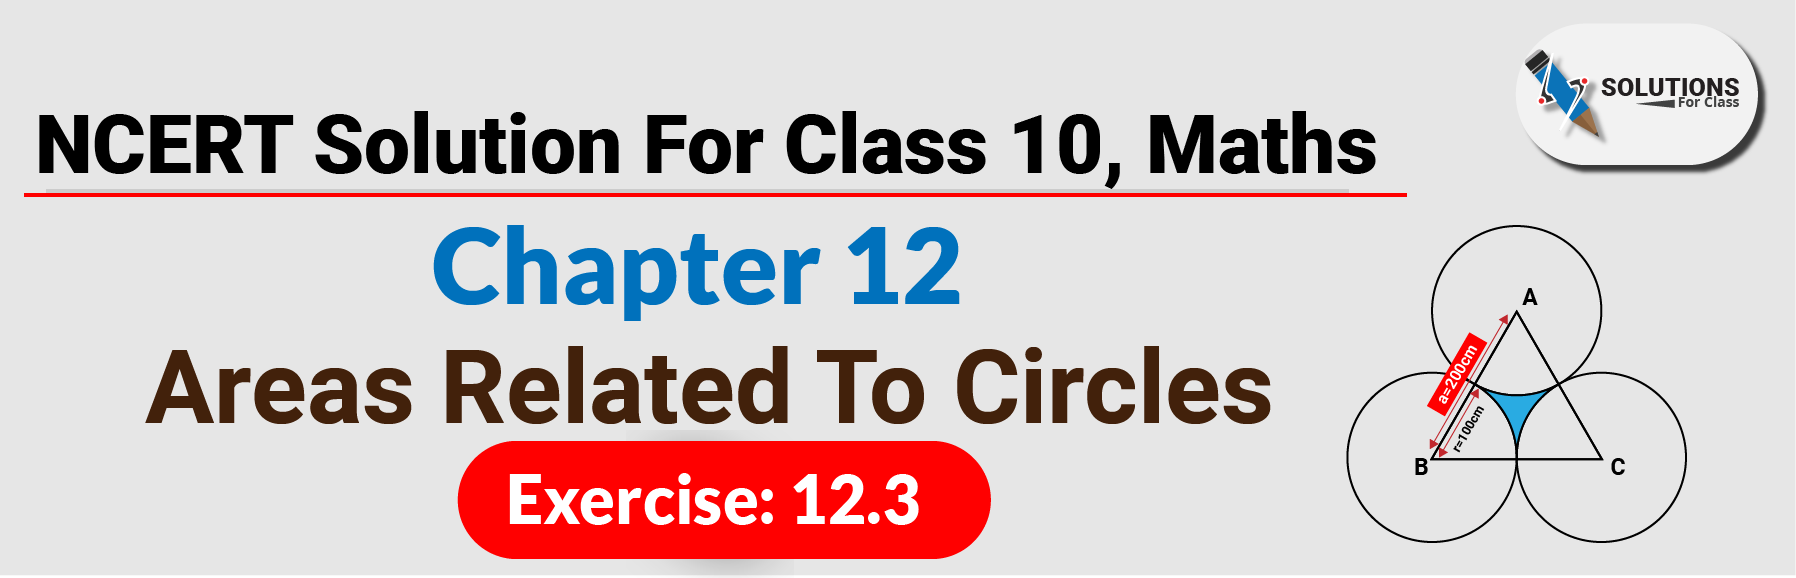 NCERT Solution For Class 10, Maths, Chapter 12, Areas Related To Circles, Ex. 12.3